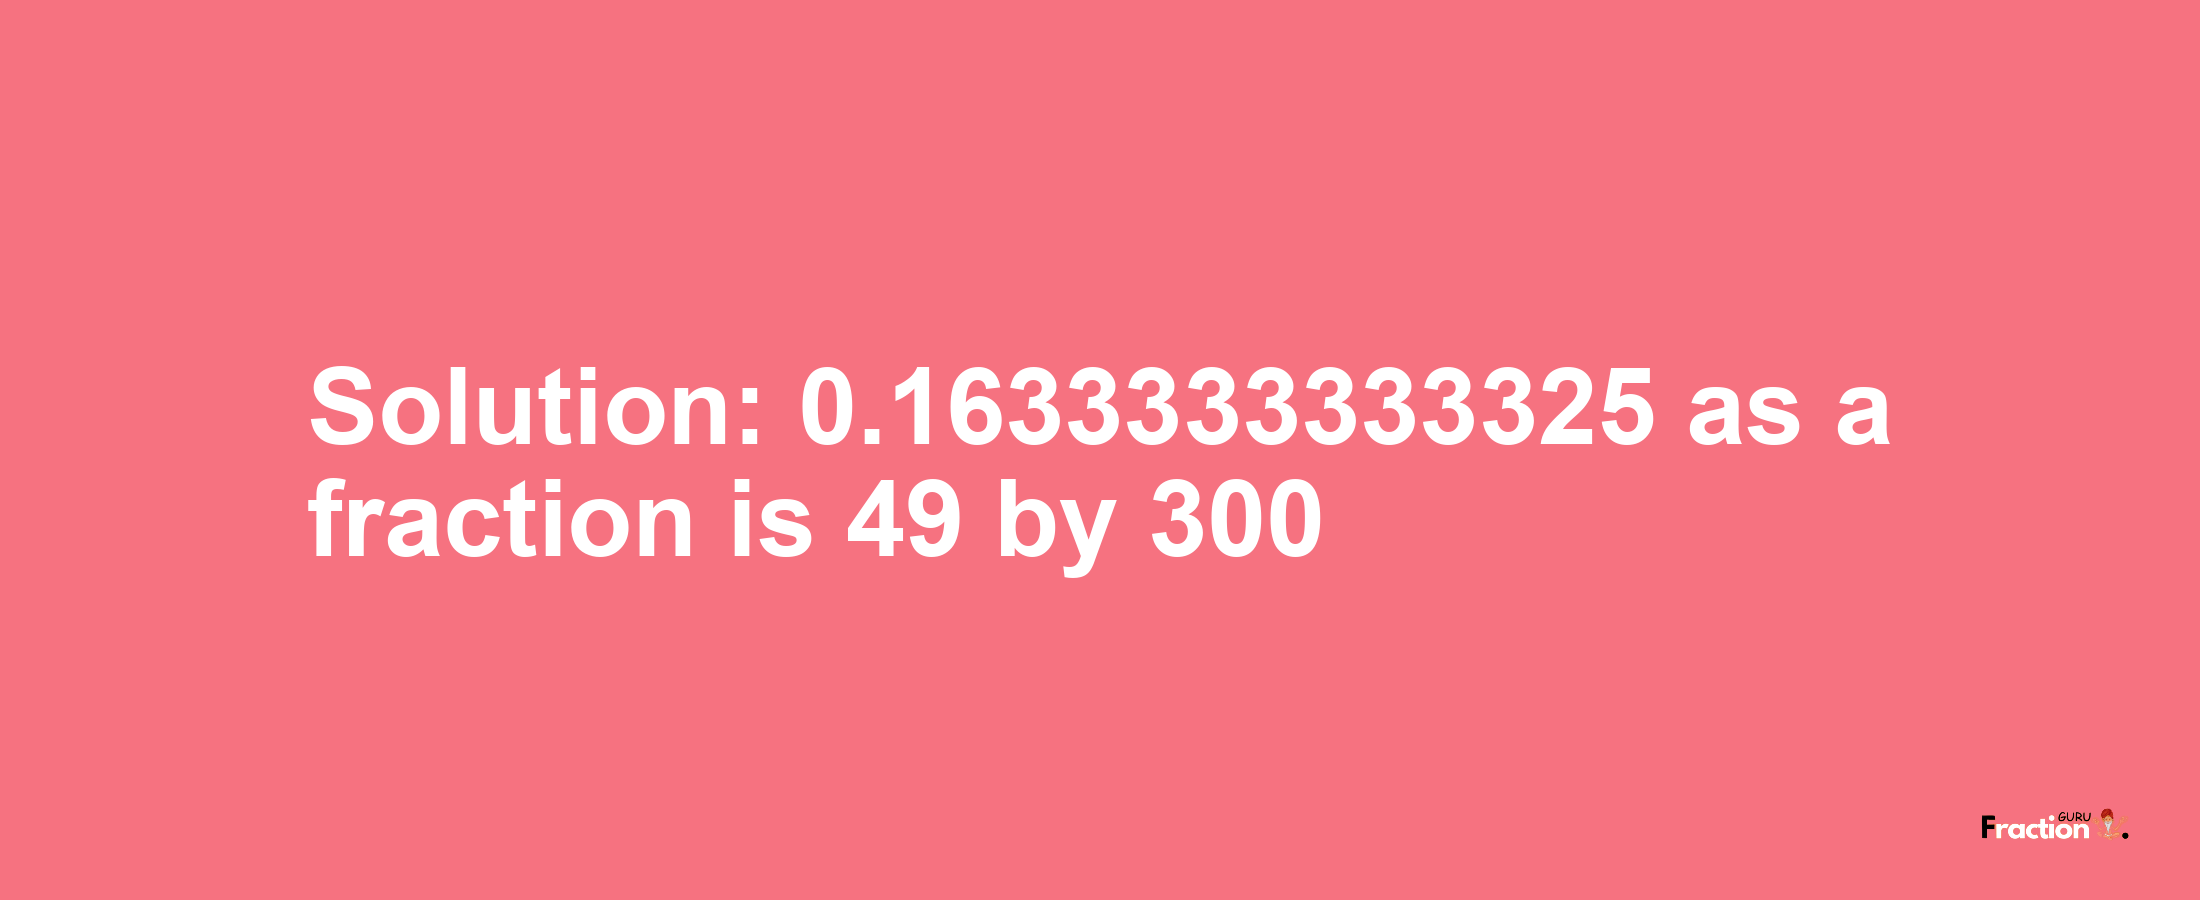 Solution:0.1633333333325 as a fraction is 49/300